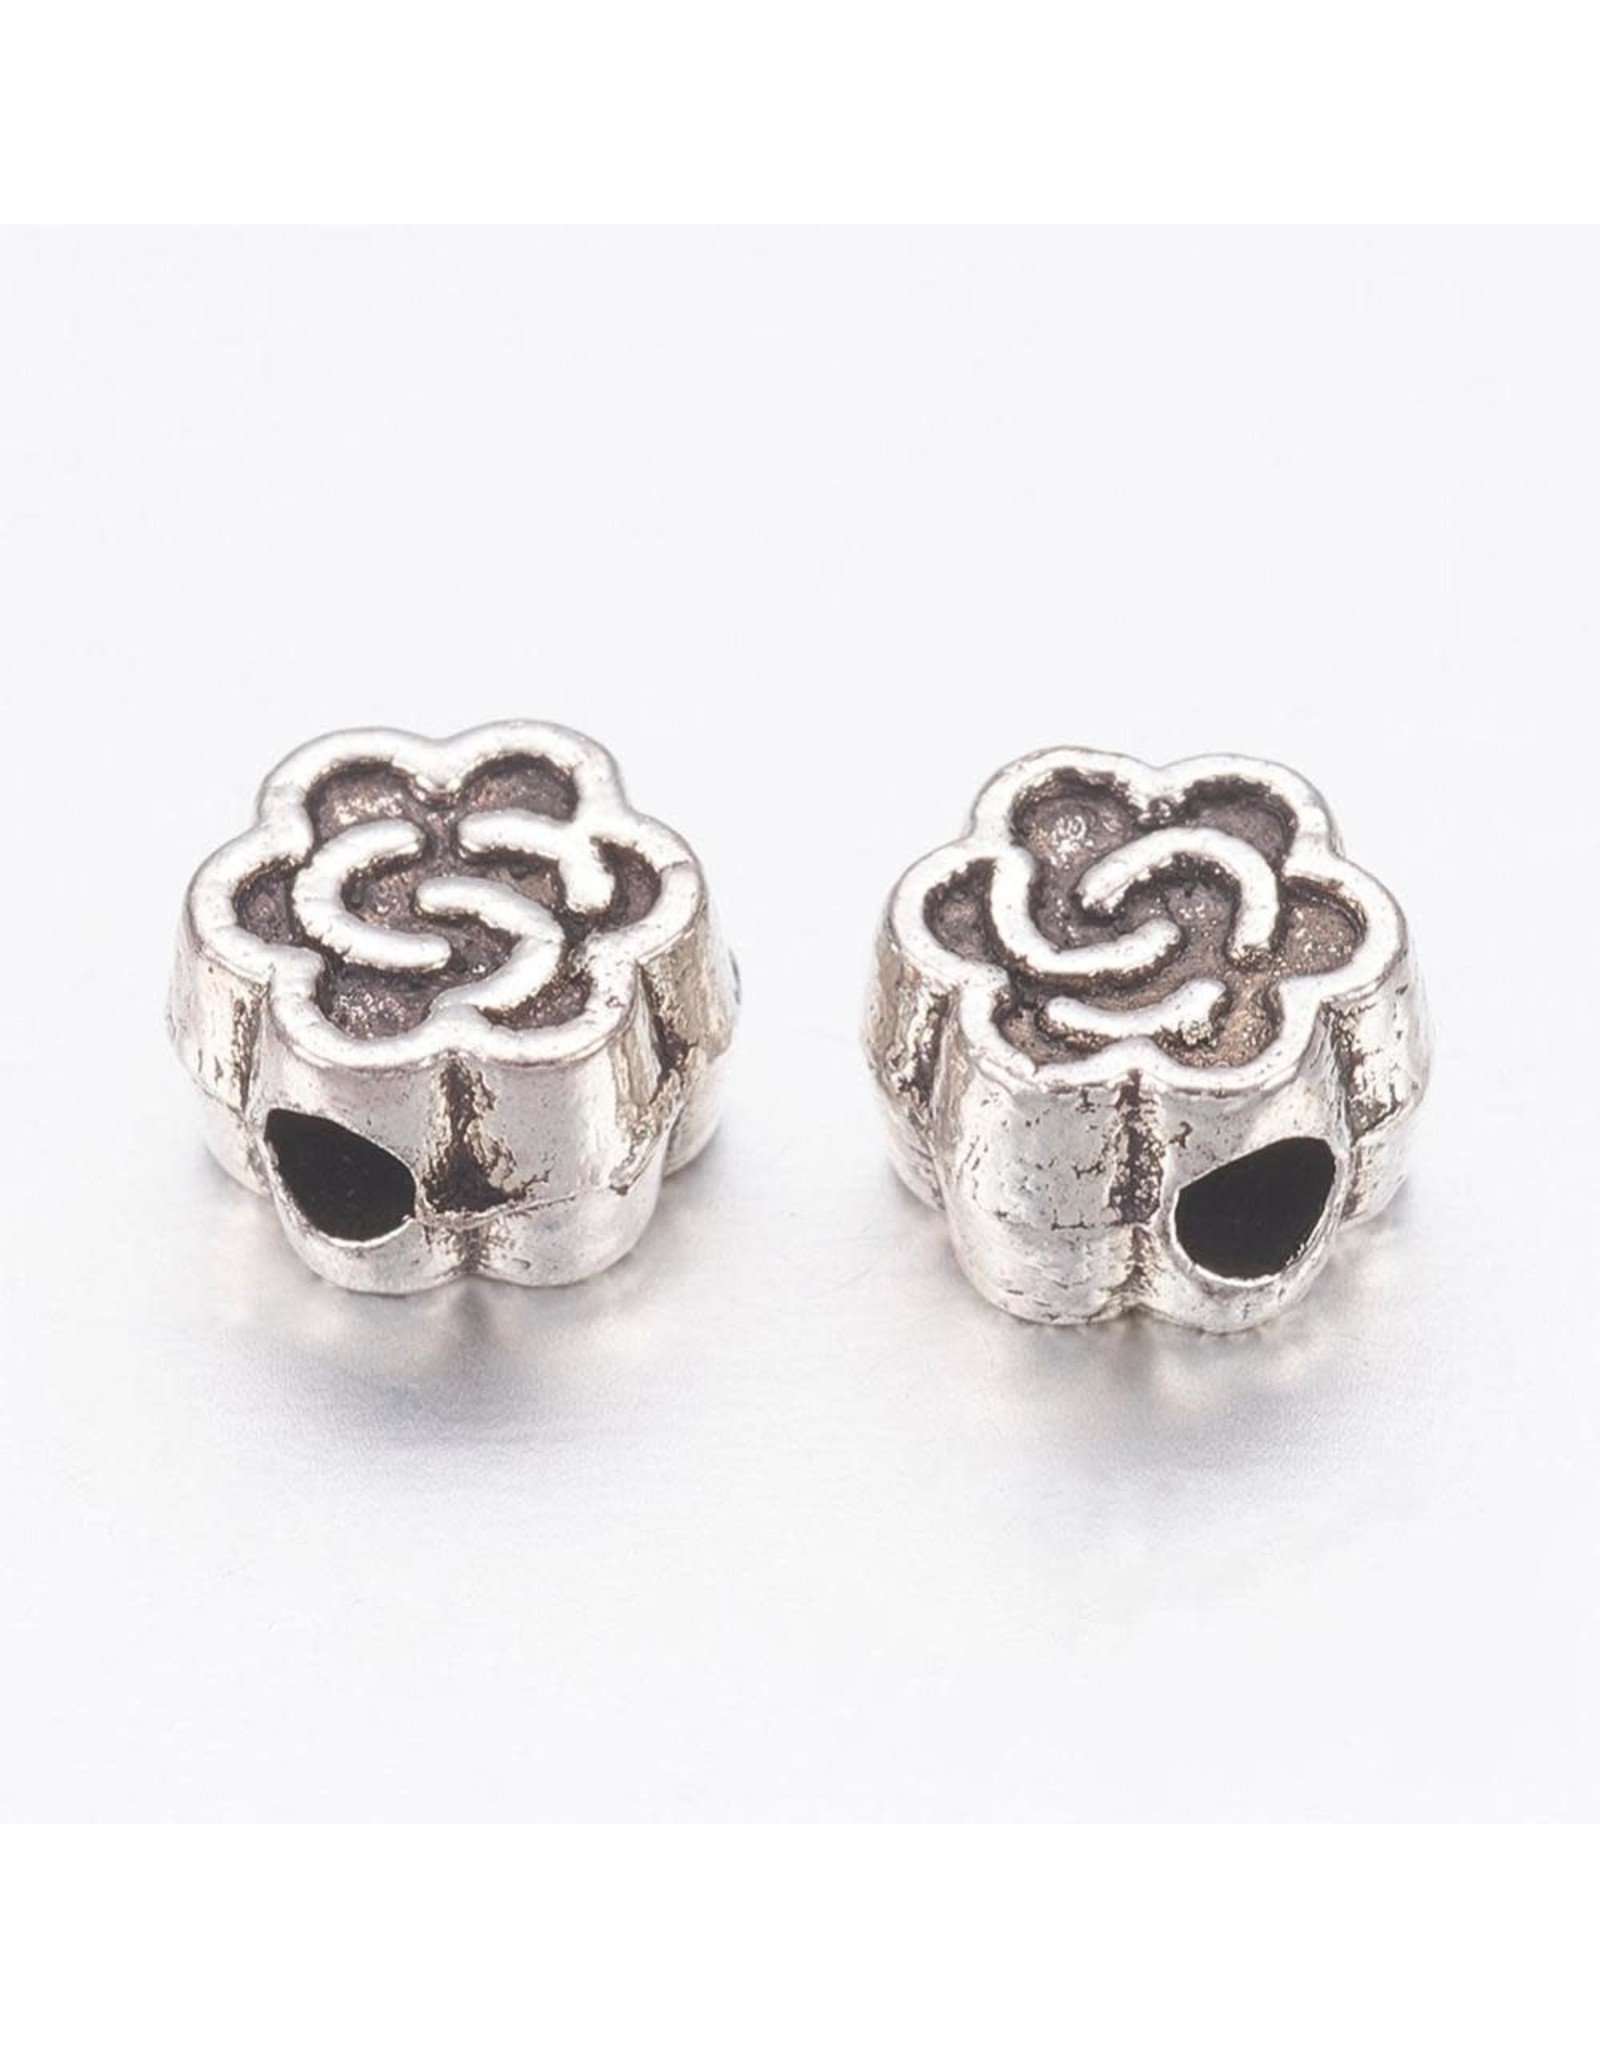 Celtic Knot Bead Antique Silver 4.5mm  x25